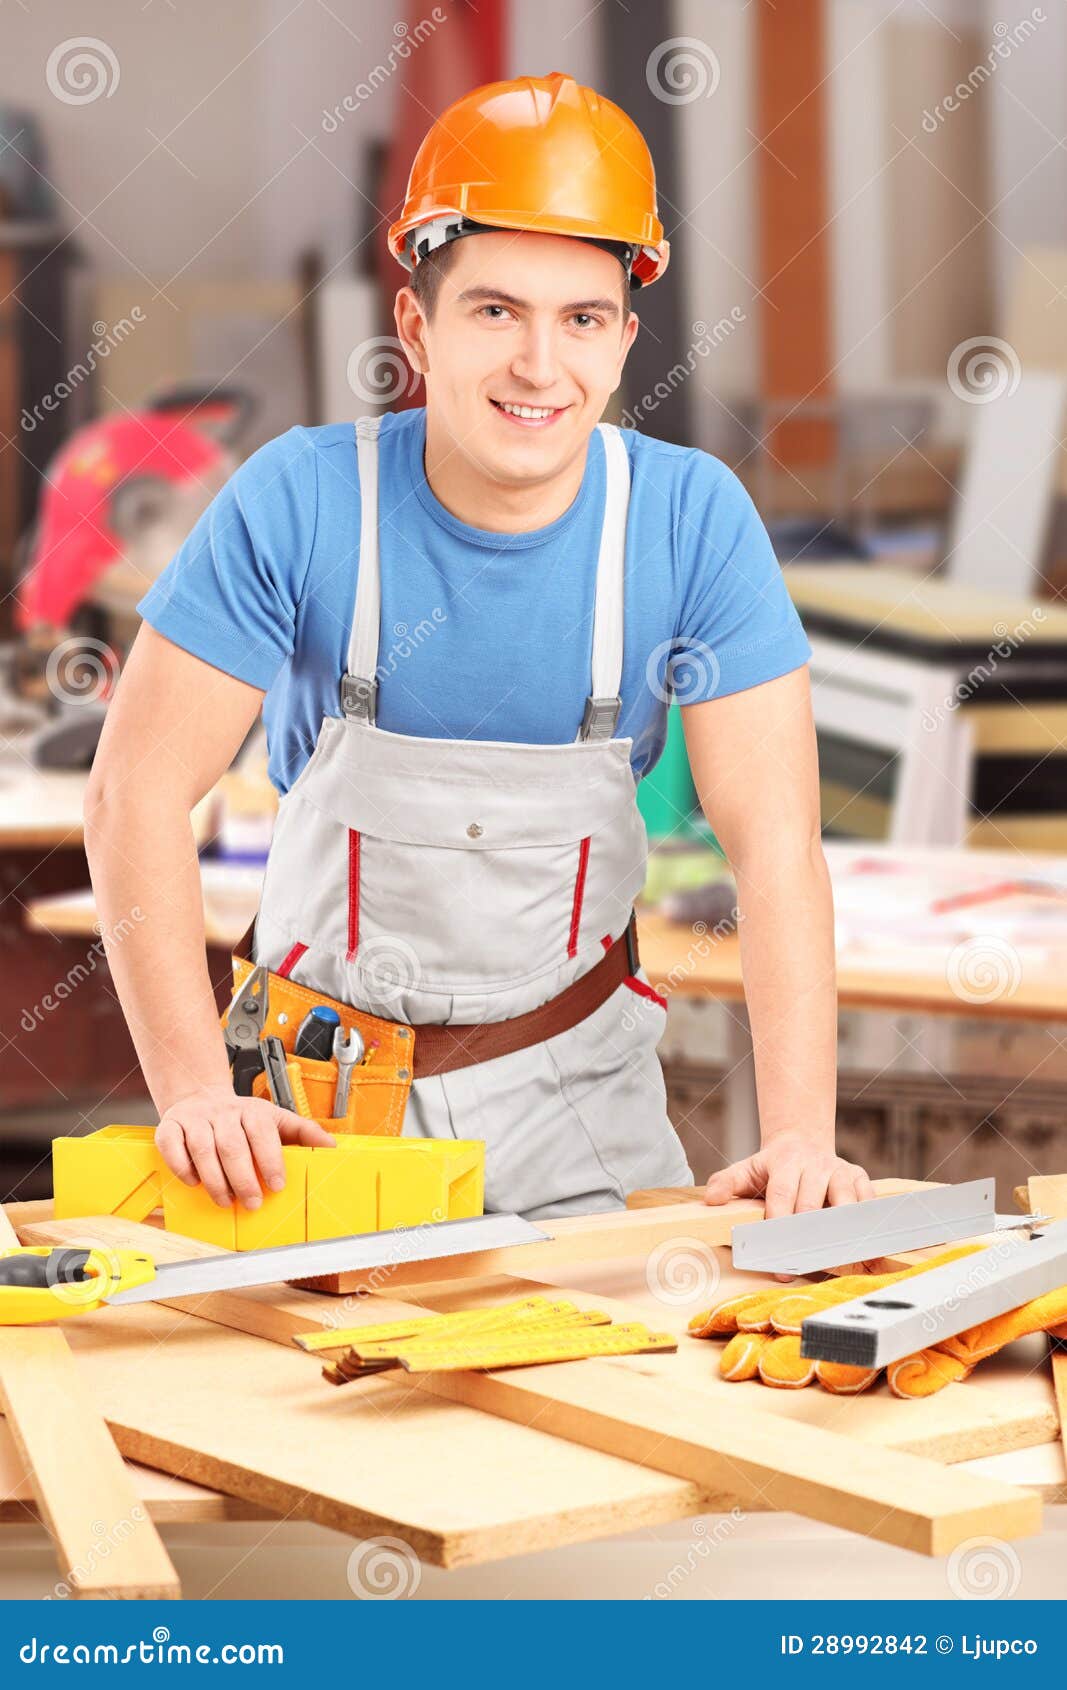 Carpenter Working In A Workshop Stock Photo - Image: 28992842